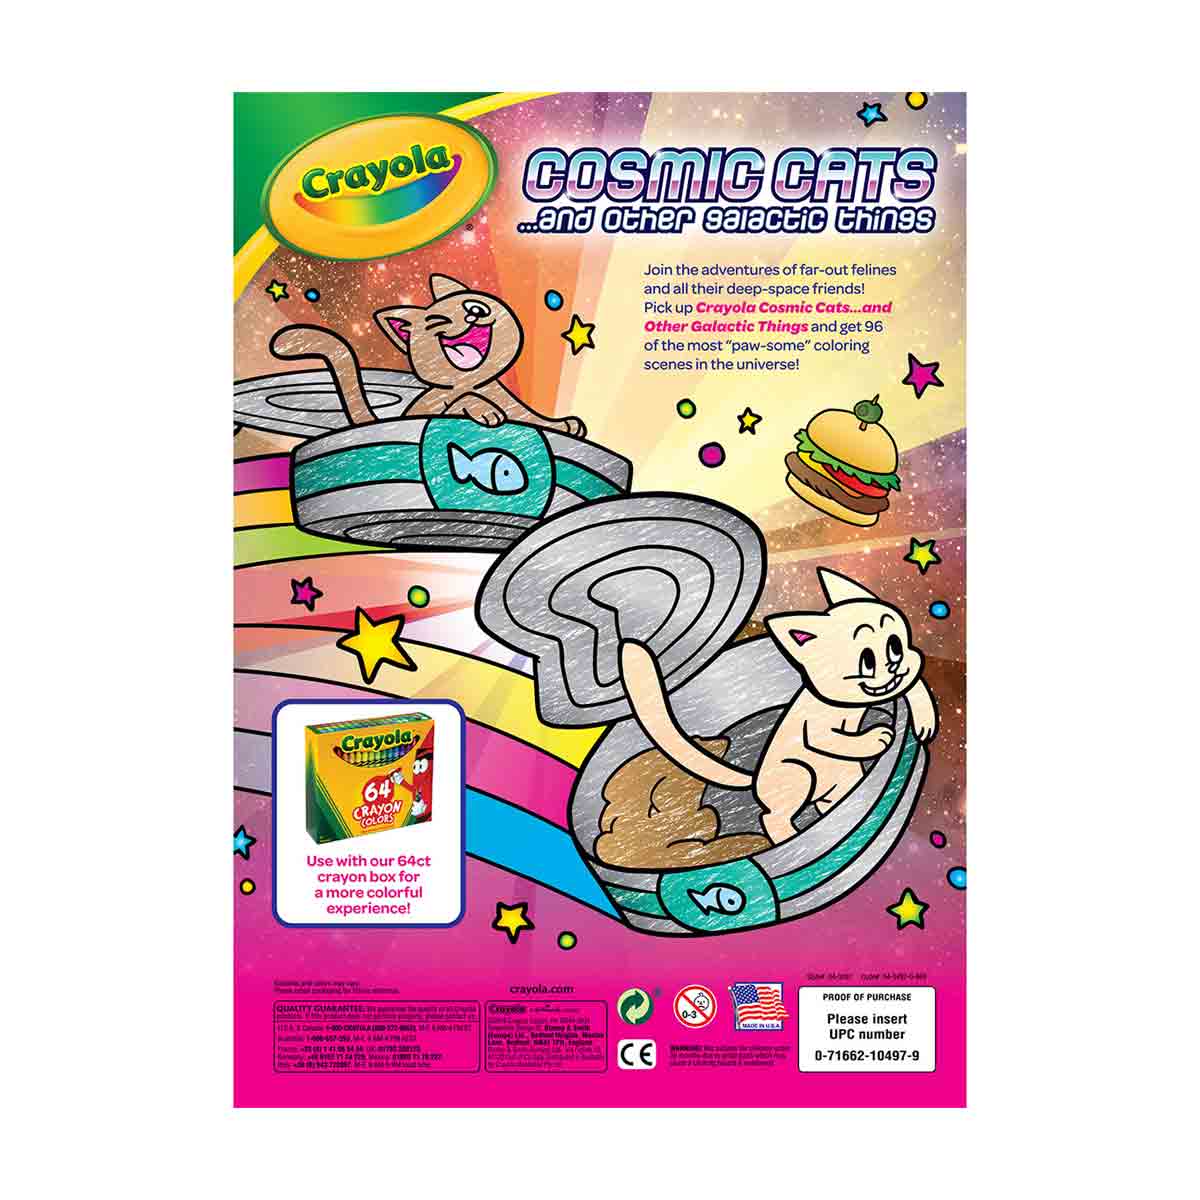 Download Crayola Cosmic Cats Coloring Book, Sticker Sheet, 96 Pages